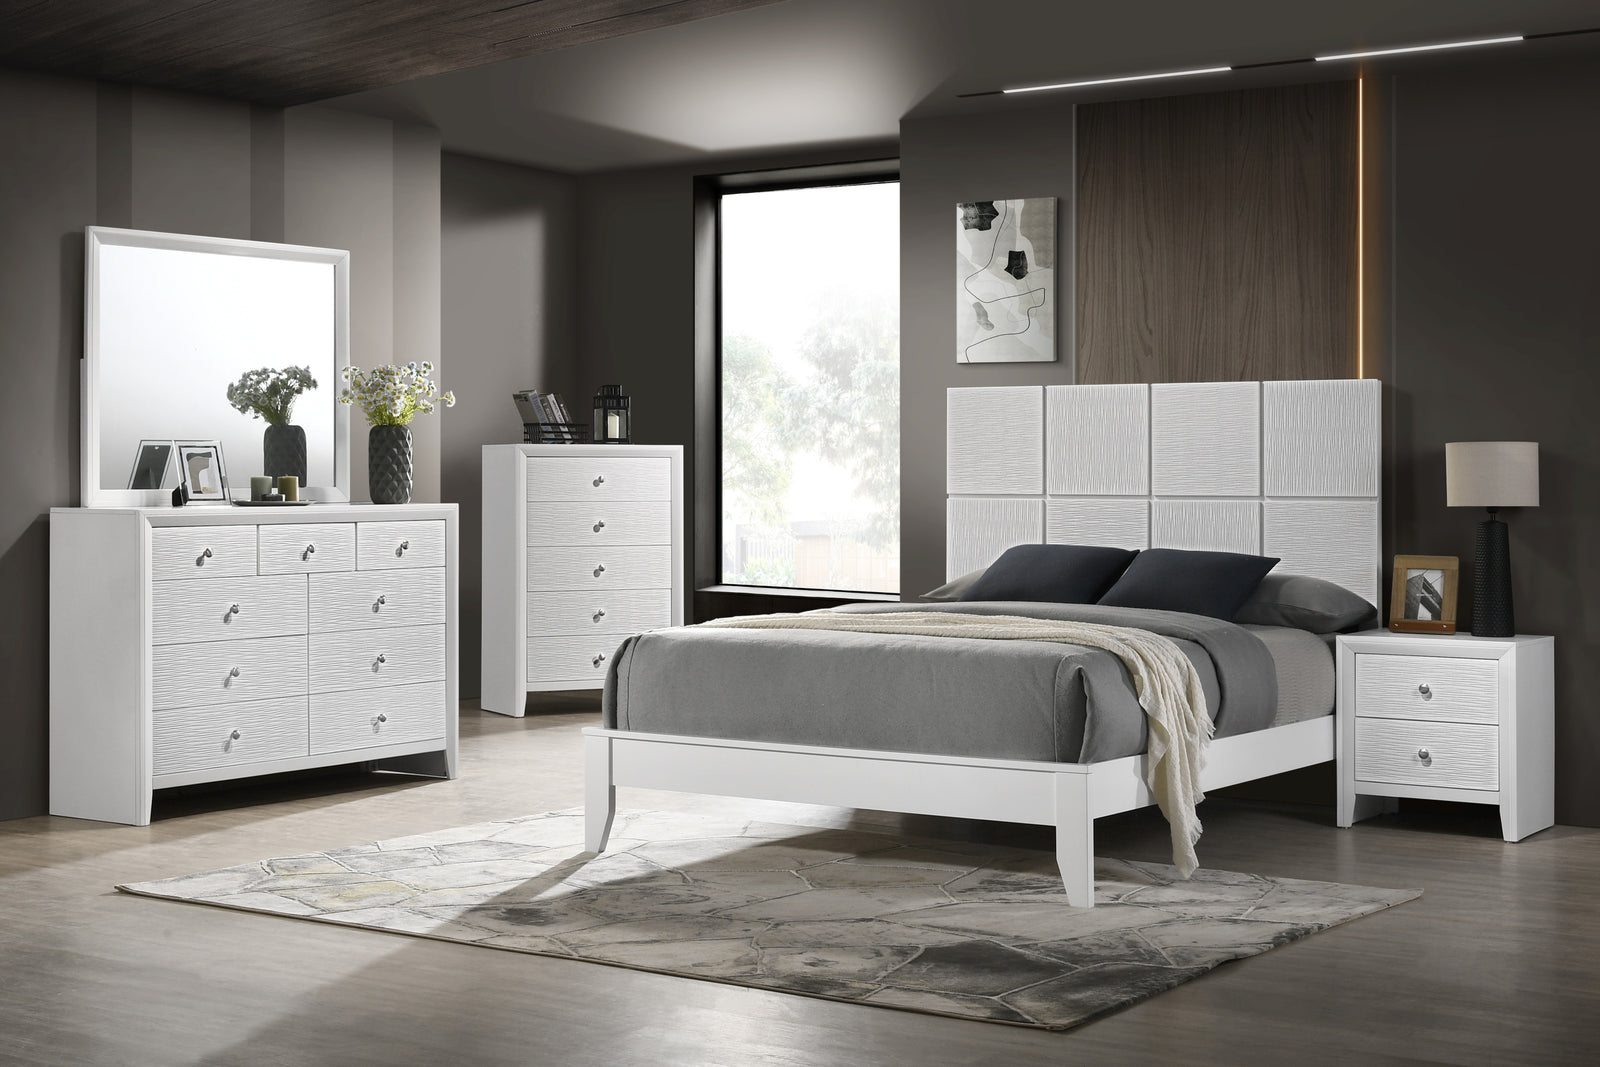 Denker-evan White Modern Contemporary Solid Wood Queen Bed